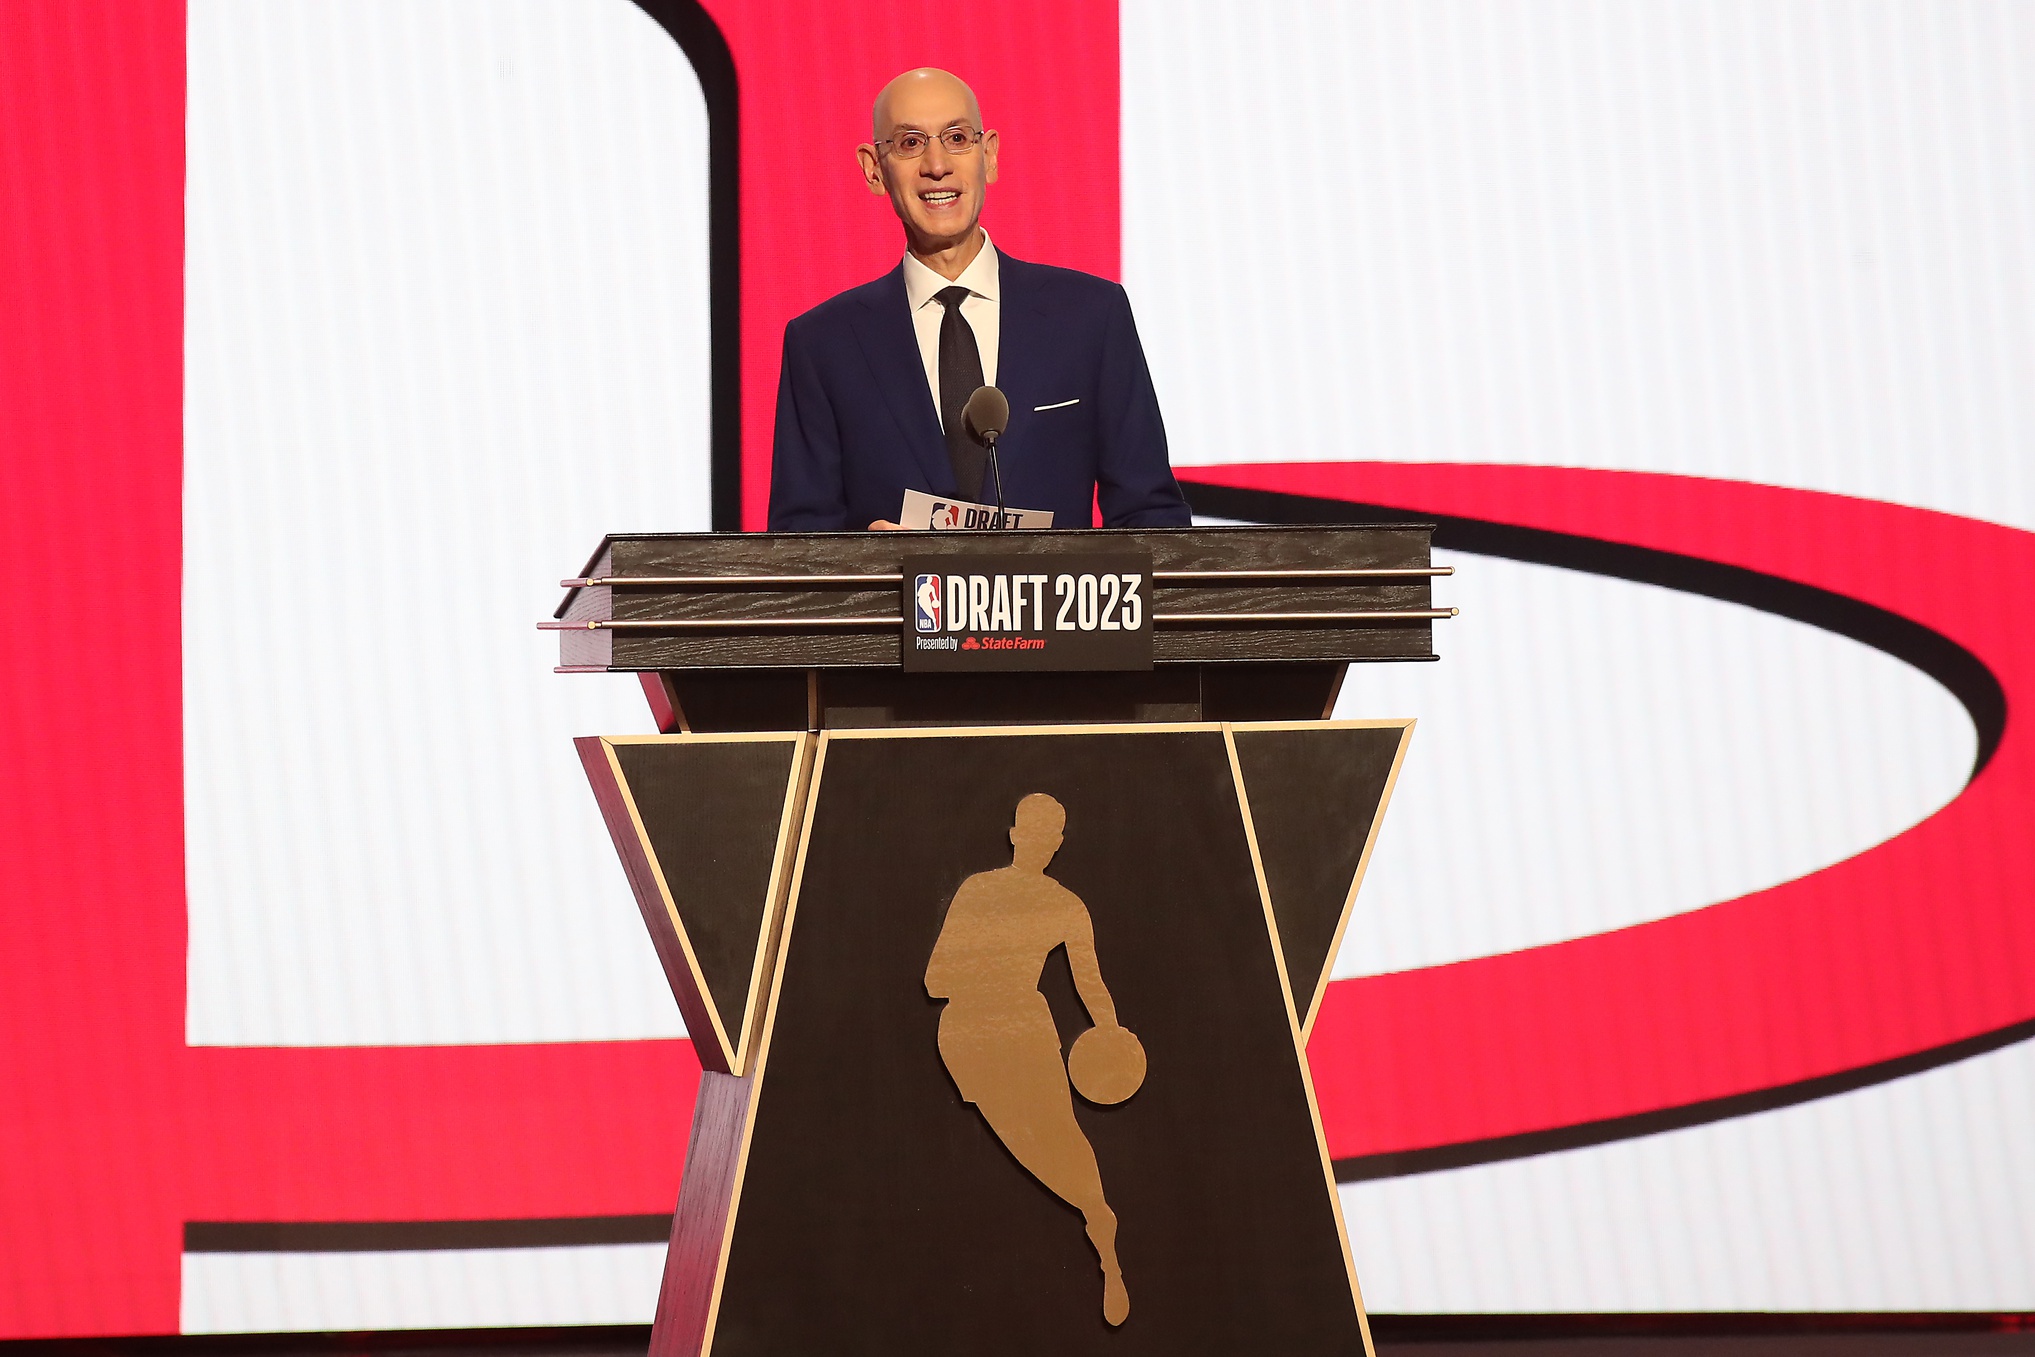 Adam Silver announces draft picks as the link between college basketball and the NBA Draft is less clear.